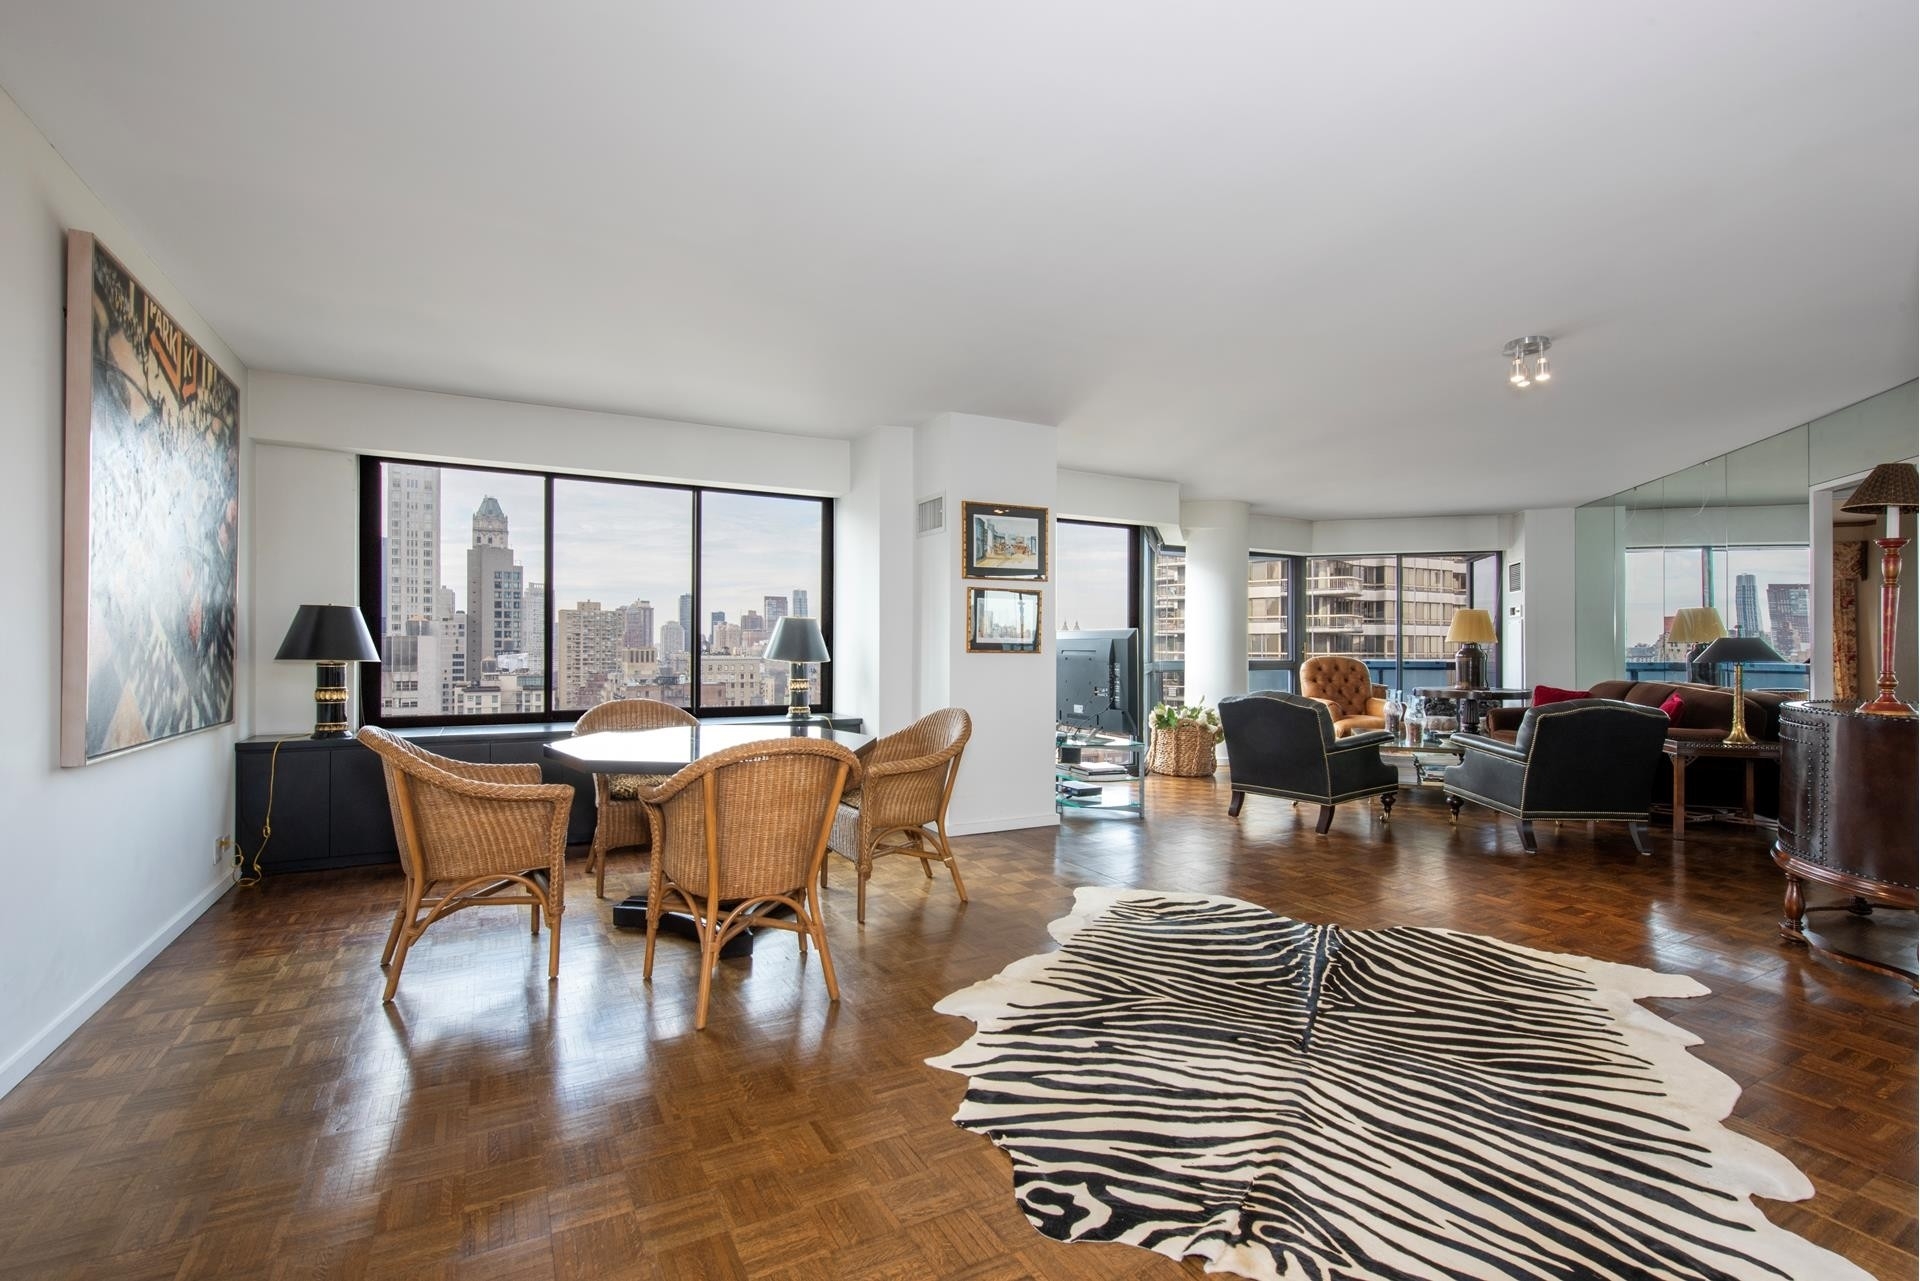 2. Condominiums for Sale at The Savoy, 200 E 61ST ST, 25CD Lenox Hill, New York, New York 10065